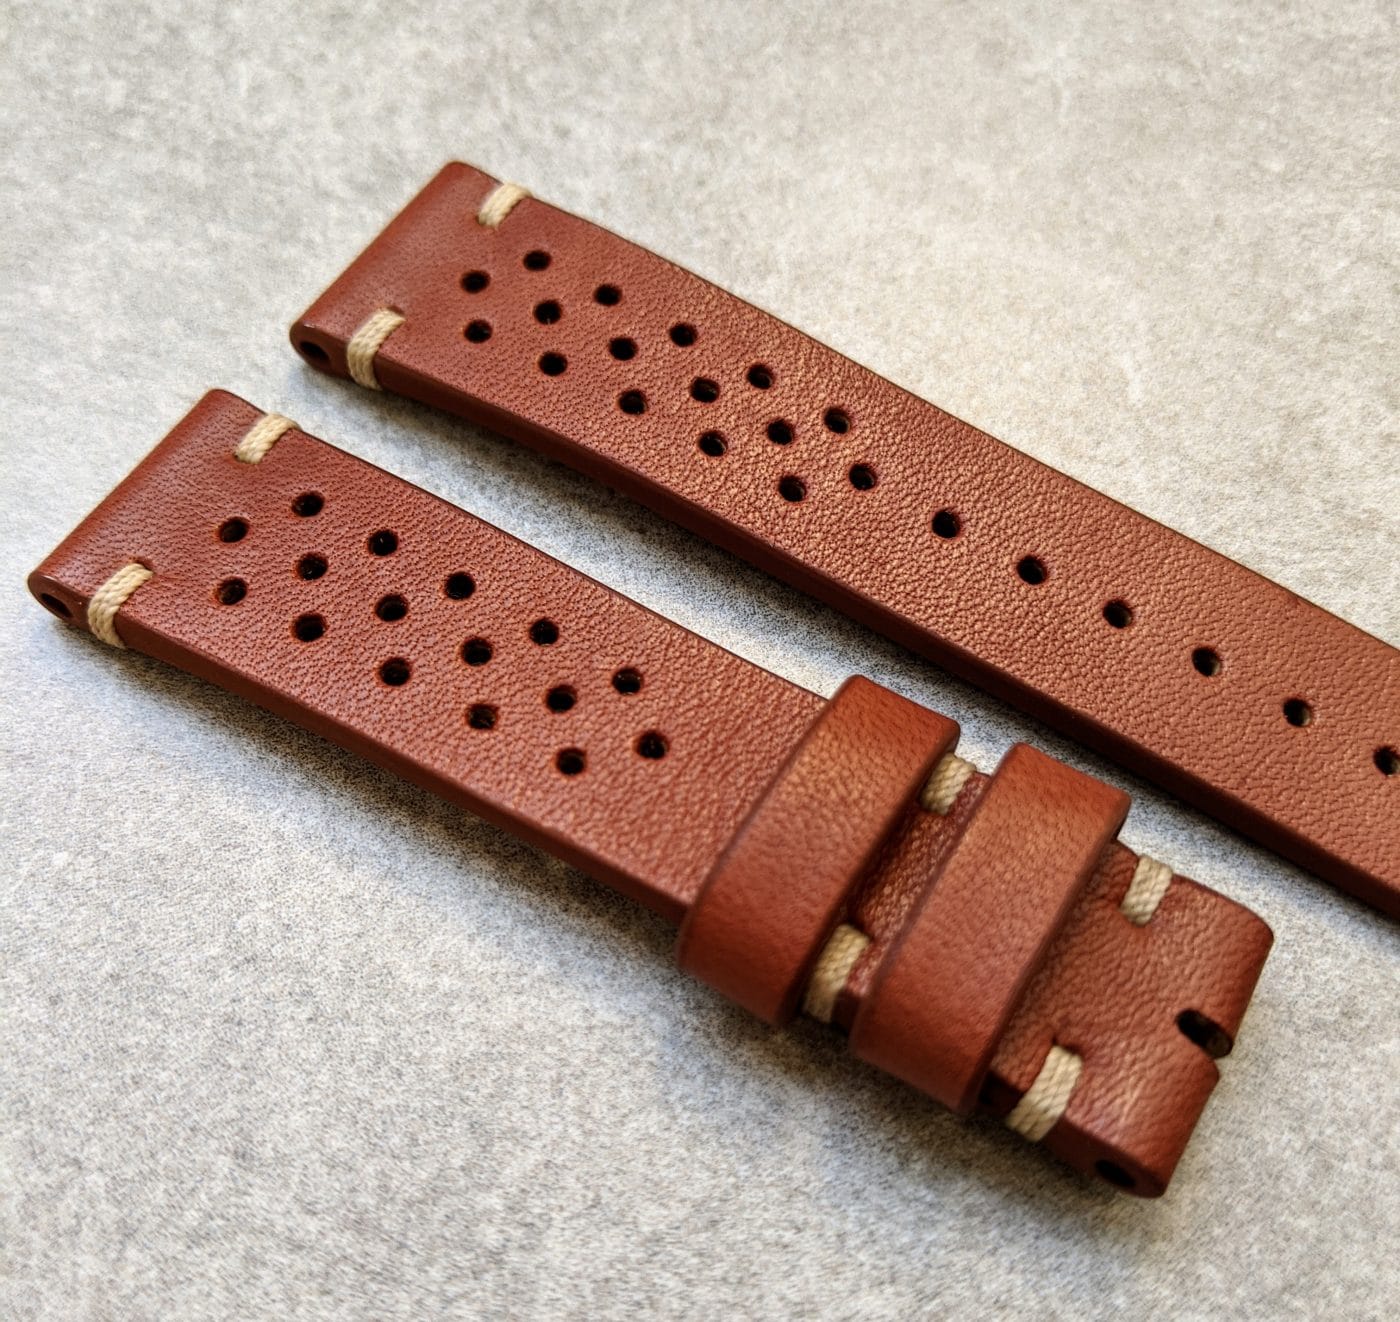 French Calfskin Rally Strap - Mahogany - The Strap Tailor